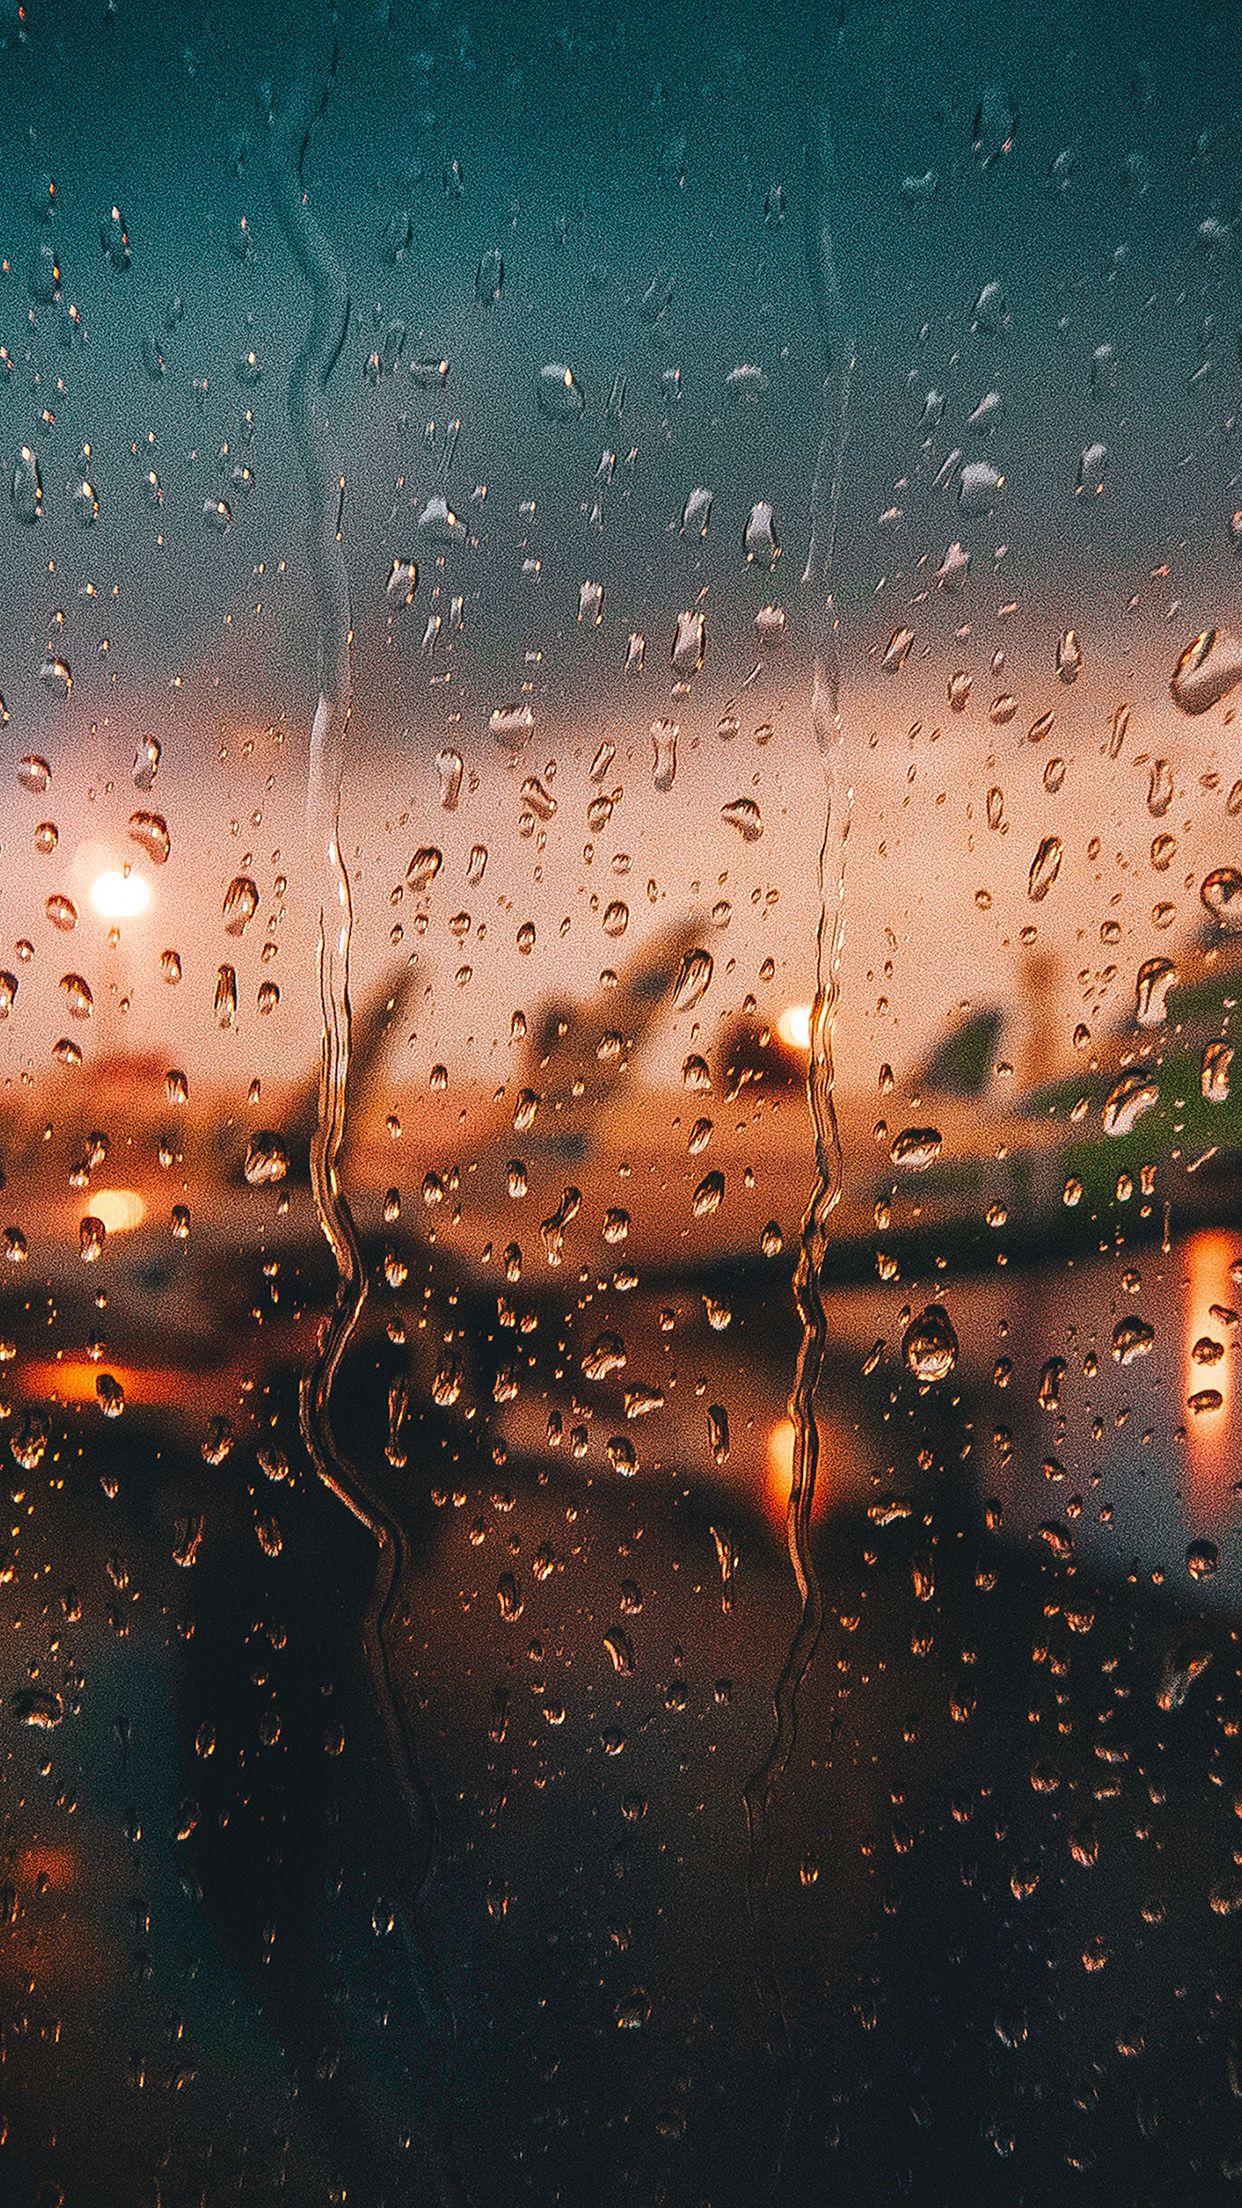 Rainy Aesthetic Wallpapers - Top Free Rainy Aesthetic Backgrounds ...